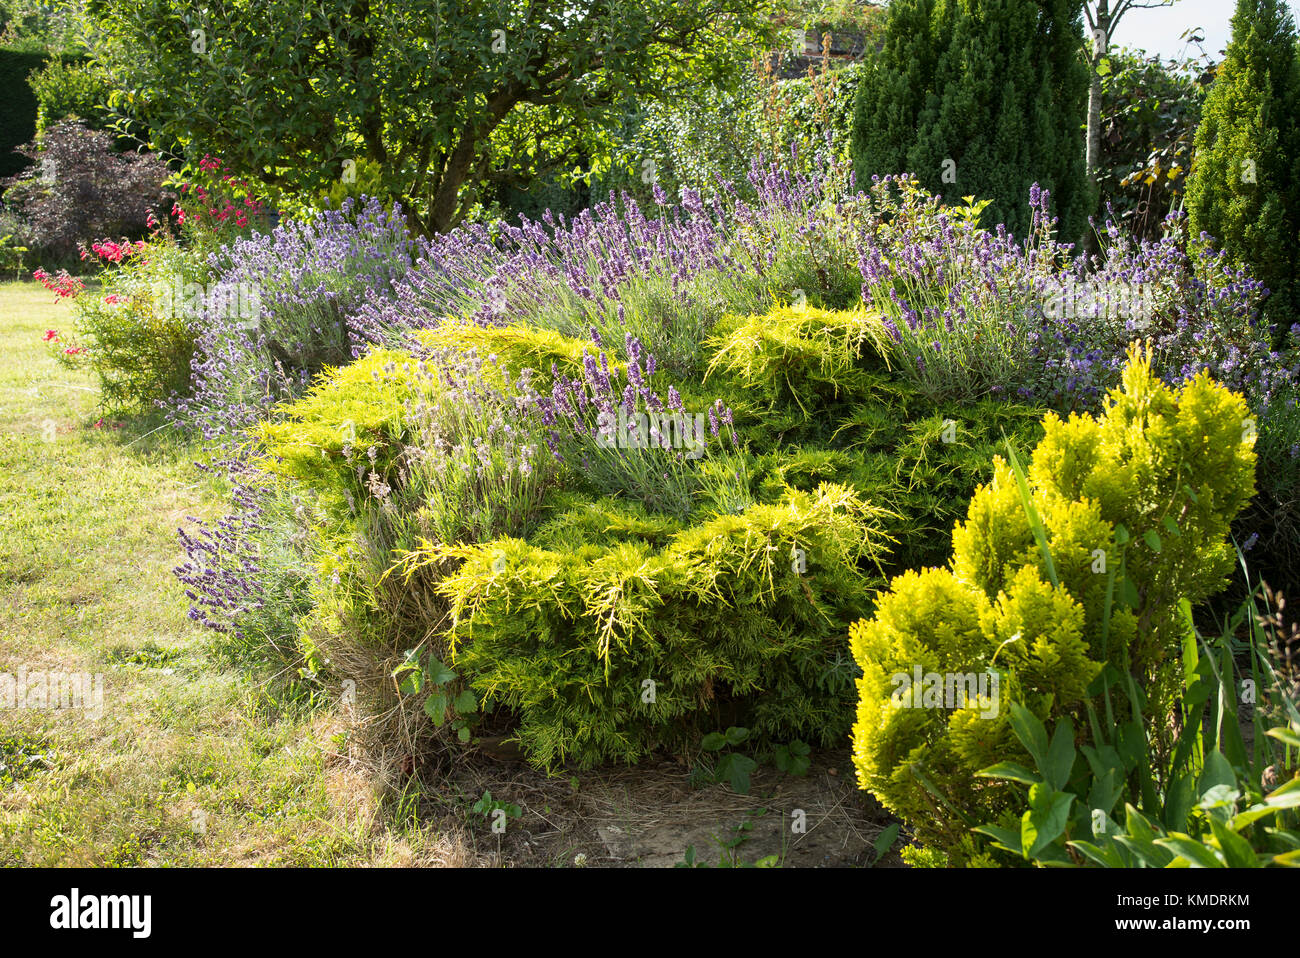 A mixed border featuring evergreen conifers lavender and fruit trees in an English garden in UK Stock Photo